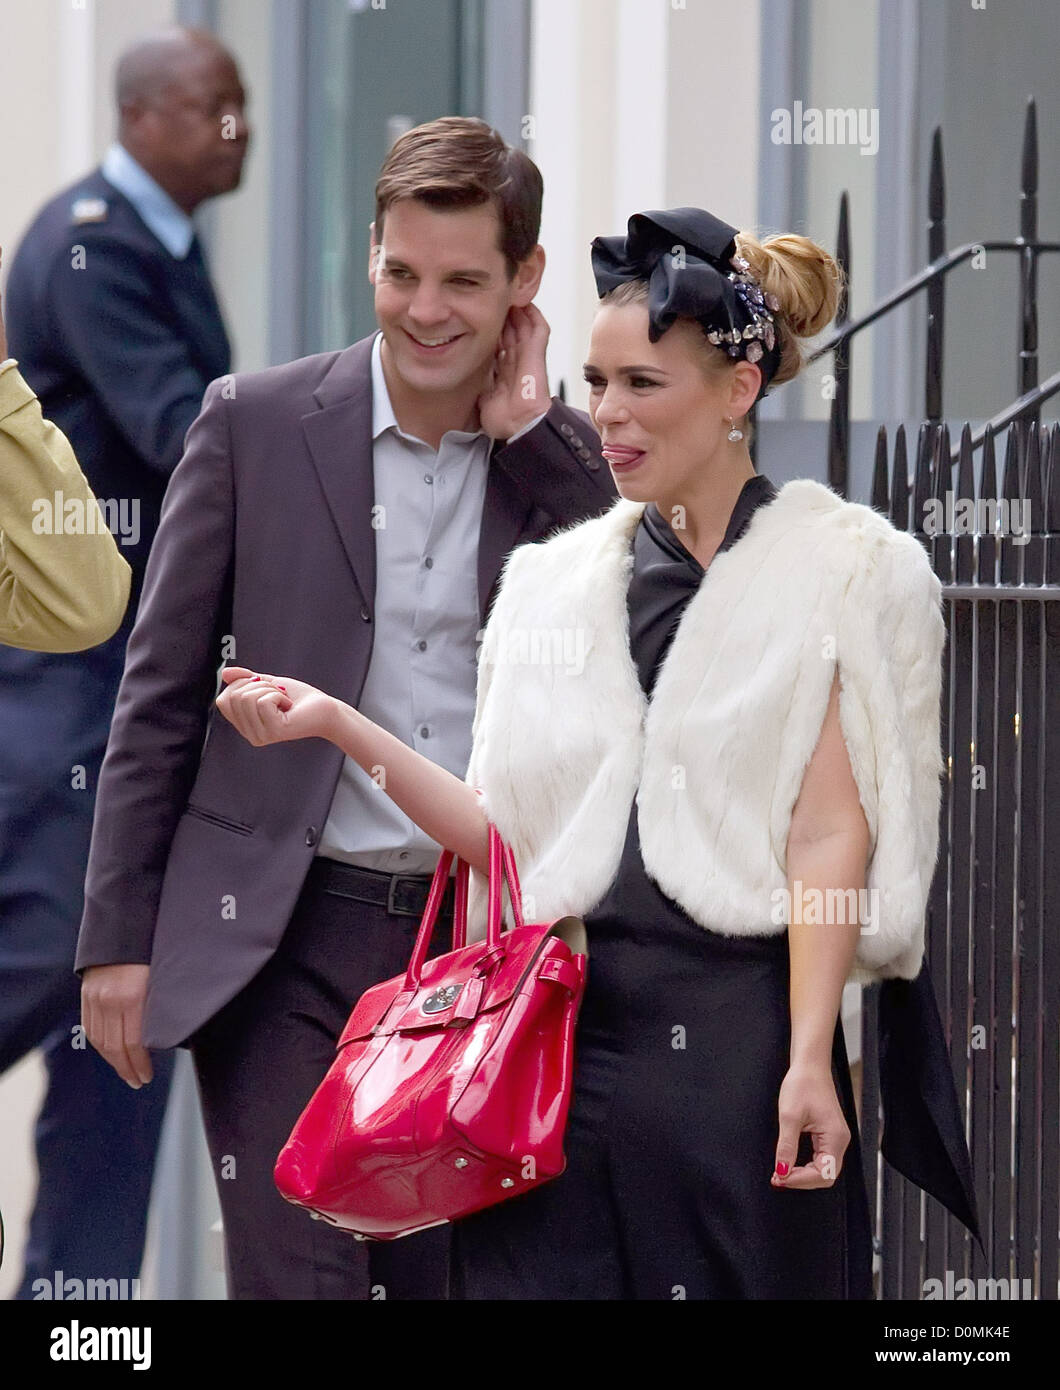 Billie Piper filming on the set of 'Secret Diary of a Call Girl' London, England - 30.08.10 Stock Photo